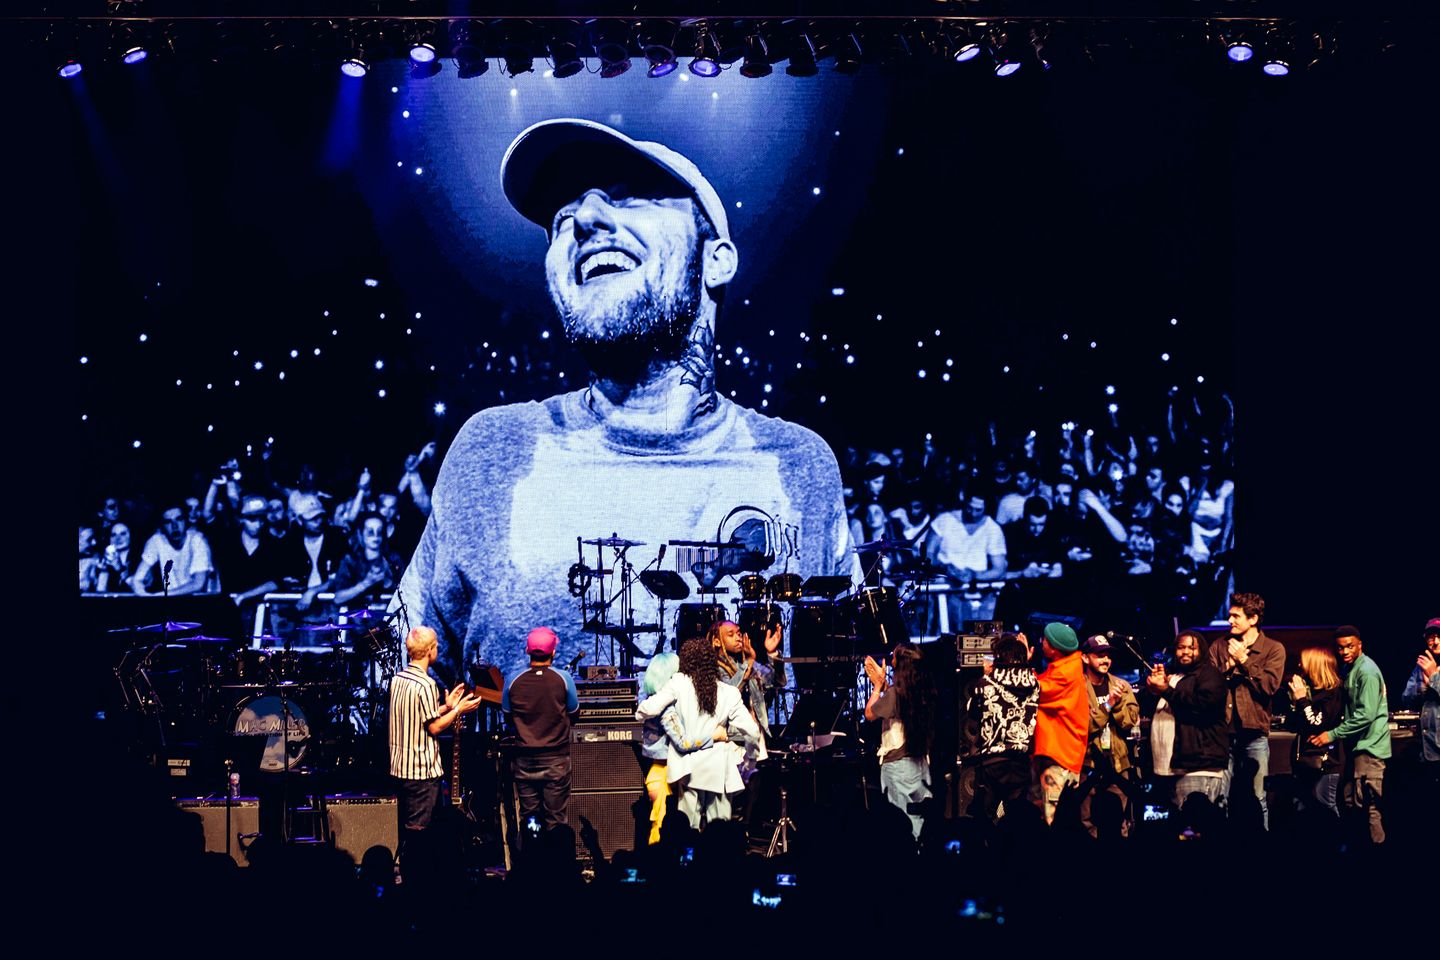 Watch the Mac Miller tribute show, "Mac Miller: A Celebration of Life"